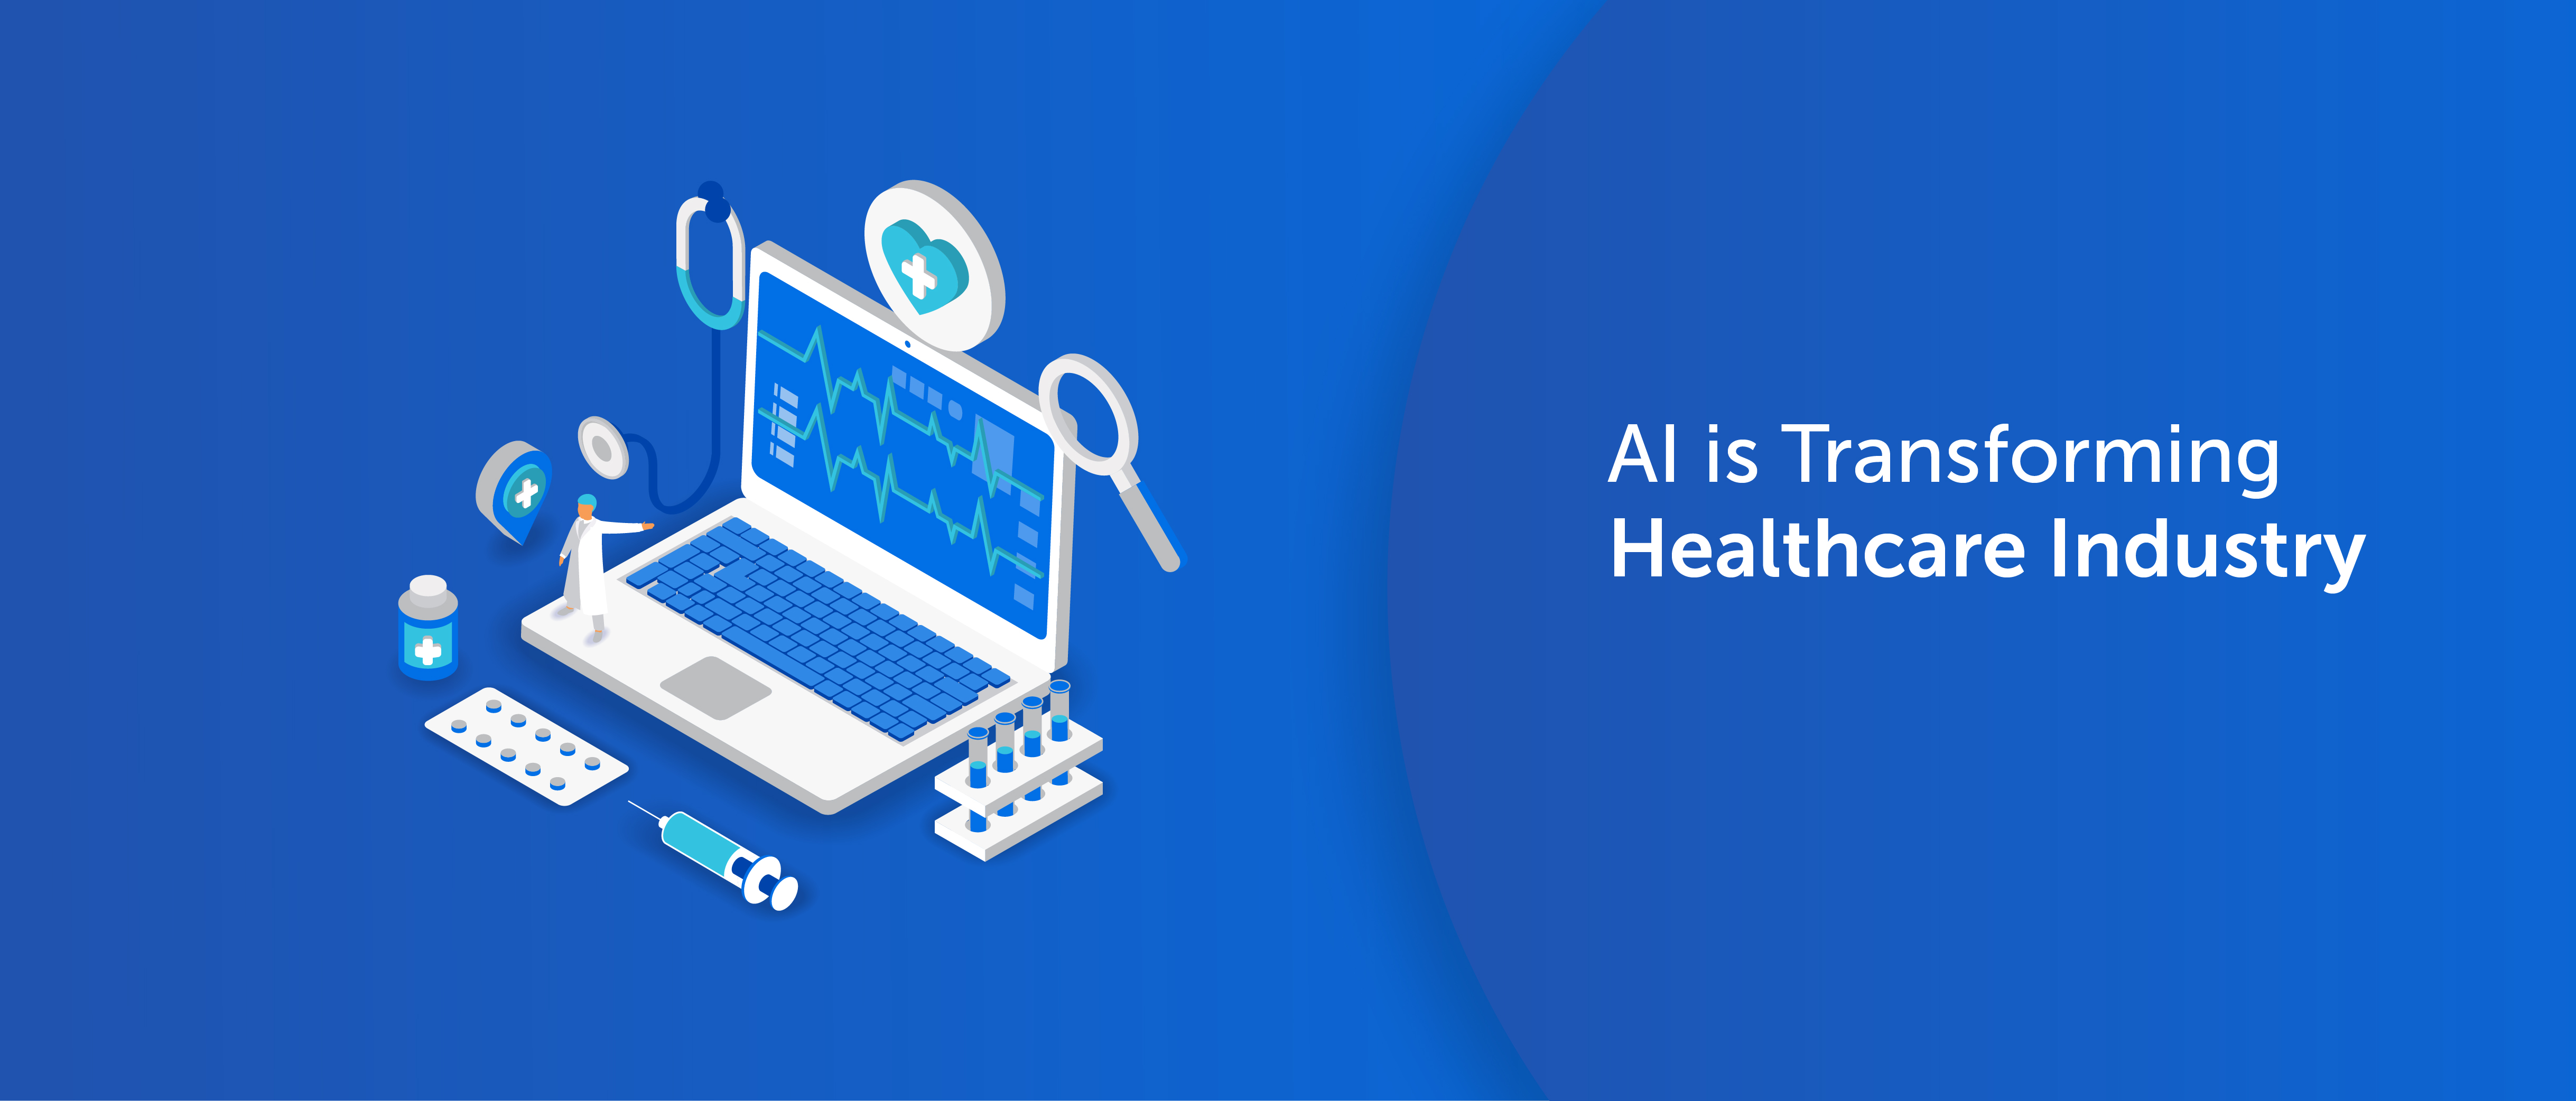 Artificial Intelligence is Transforming Healthcare Industry